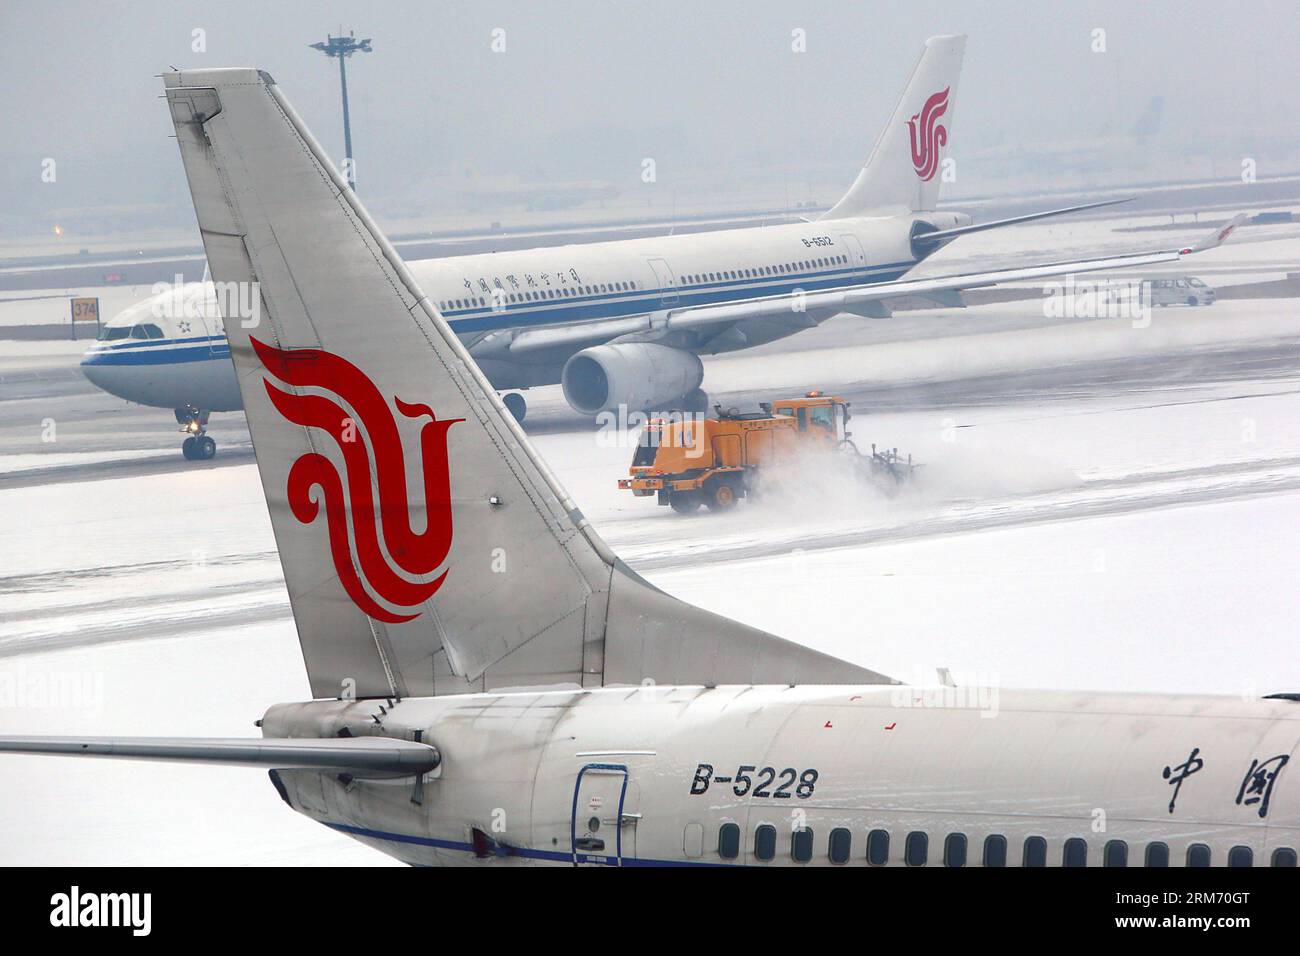 (140207) -- BEIJING, Feb. 7, 2014 (Xinhua) -- A deicing vehicle clears snow on a taxiway at the Beijing Capital International Airport in Beijing, capital of China, Feb. 7, 2014. Snow made its debut of this winter in Beijing on Friday, putting pressure on air traffic during the passenger flow return peak after a week-long lunar new year holiday. (Xinhua/Jing Lei) (cjq) CHINA-BEIJING-SNOWFALL-FLIGHT (CN) PUBLICATIONxNOTxINxCHN   Beijing Feb 7 2014 XINHUA a Deicing Vehicle clear Snow ON a Taxiway AT The Beijing Capital International Airport in Beijing Capital of China Feb 7 2014 Snow Made its Deb Stock Photo